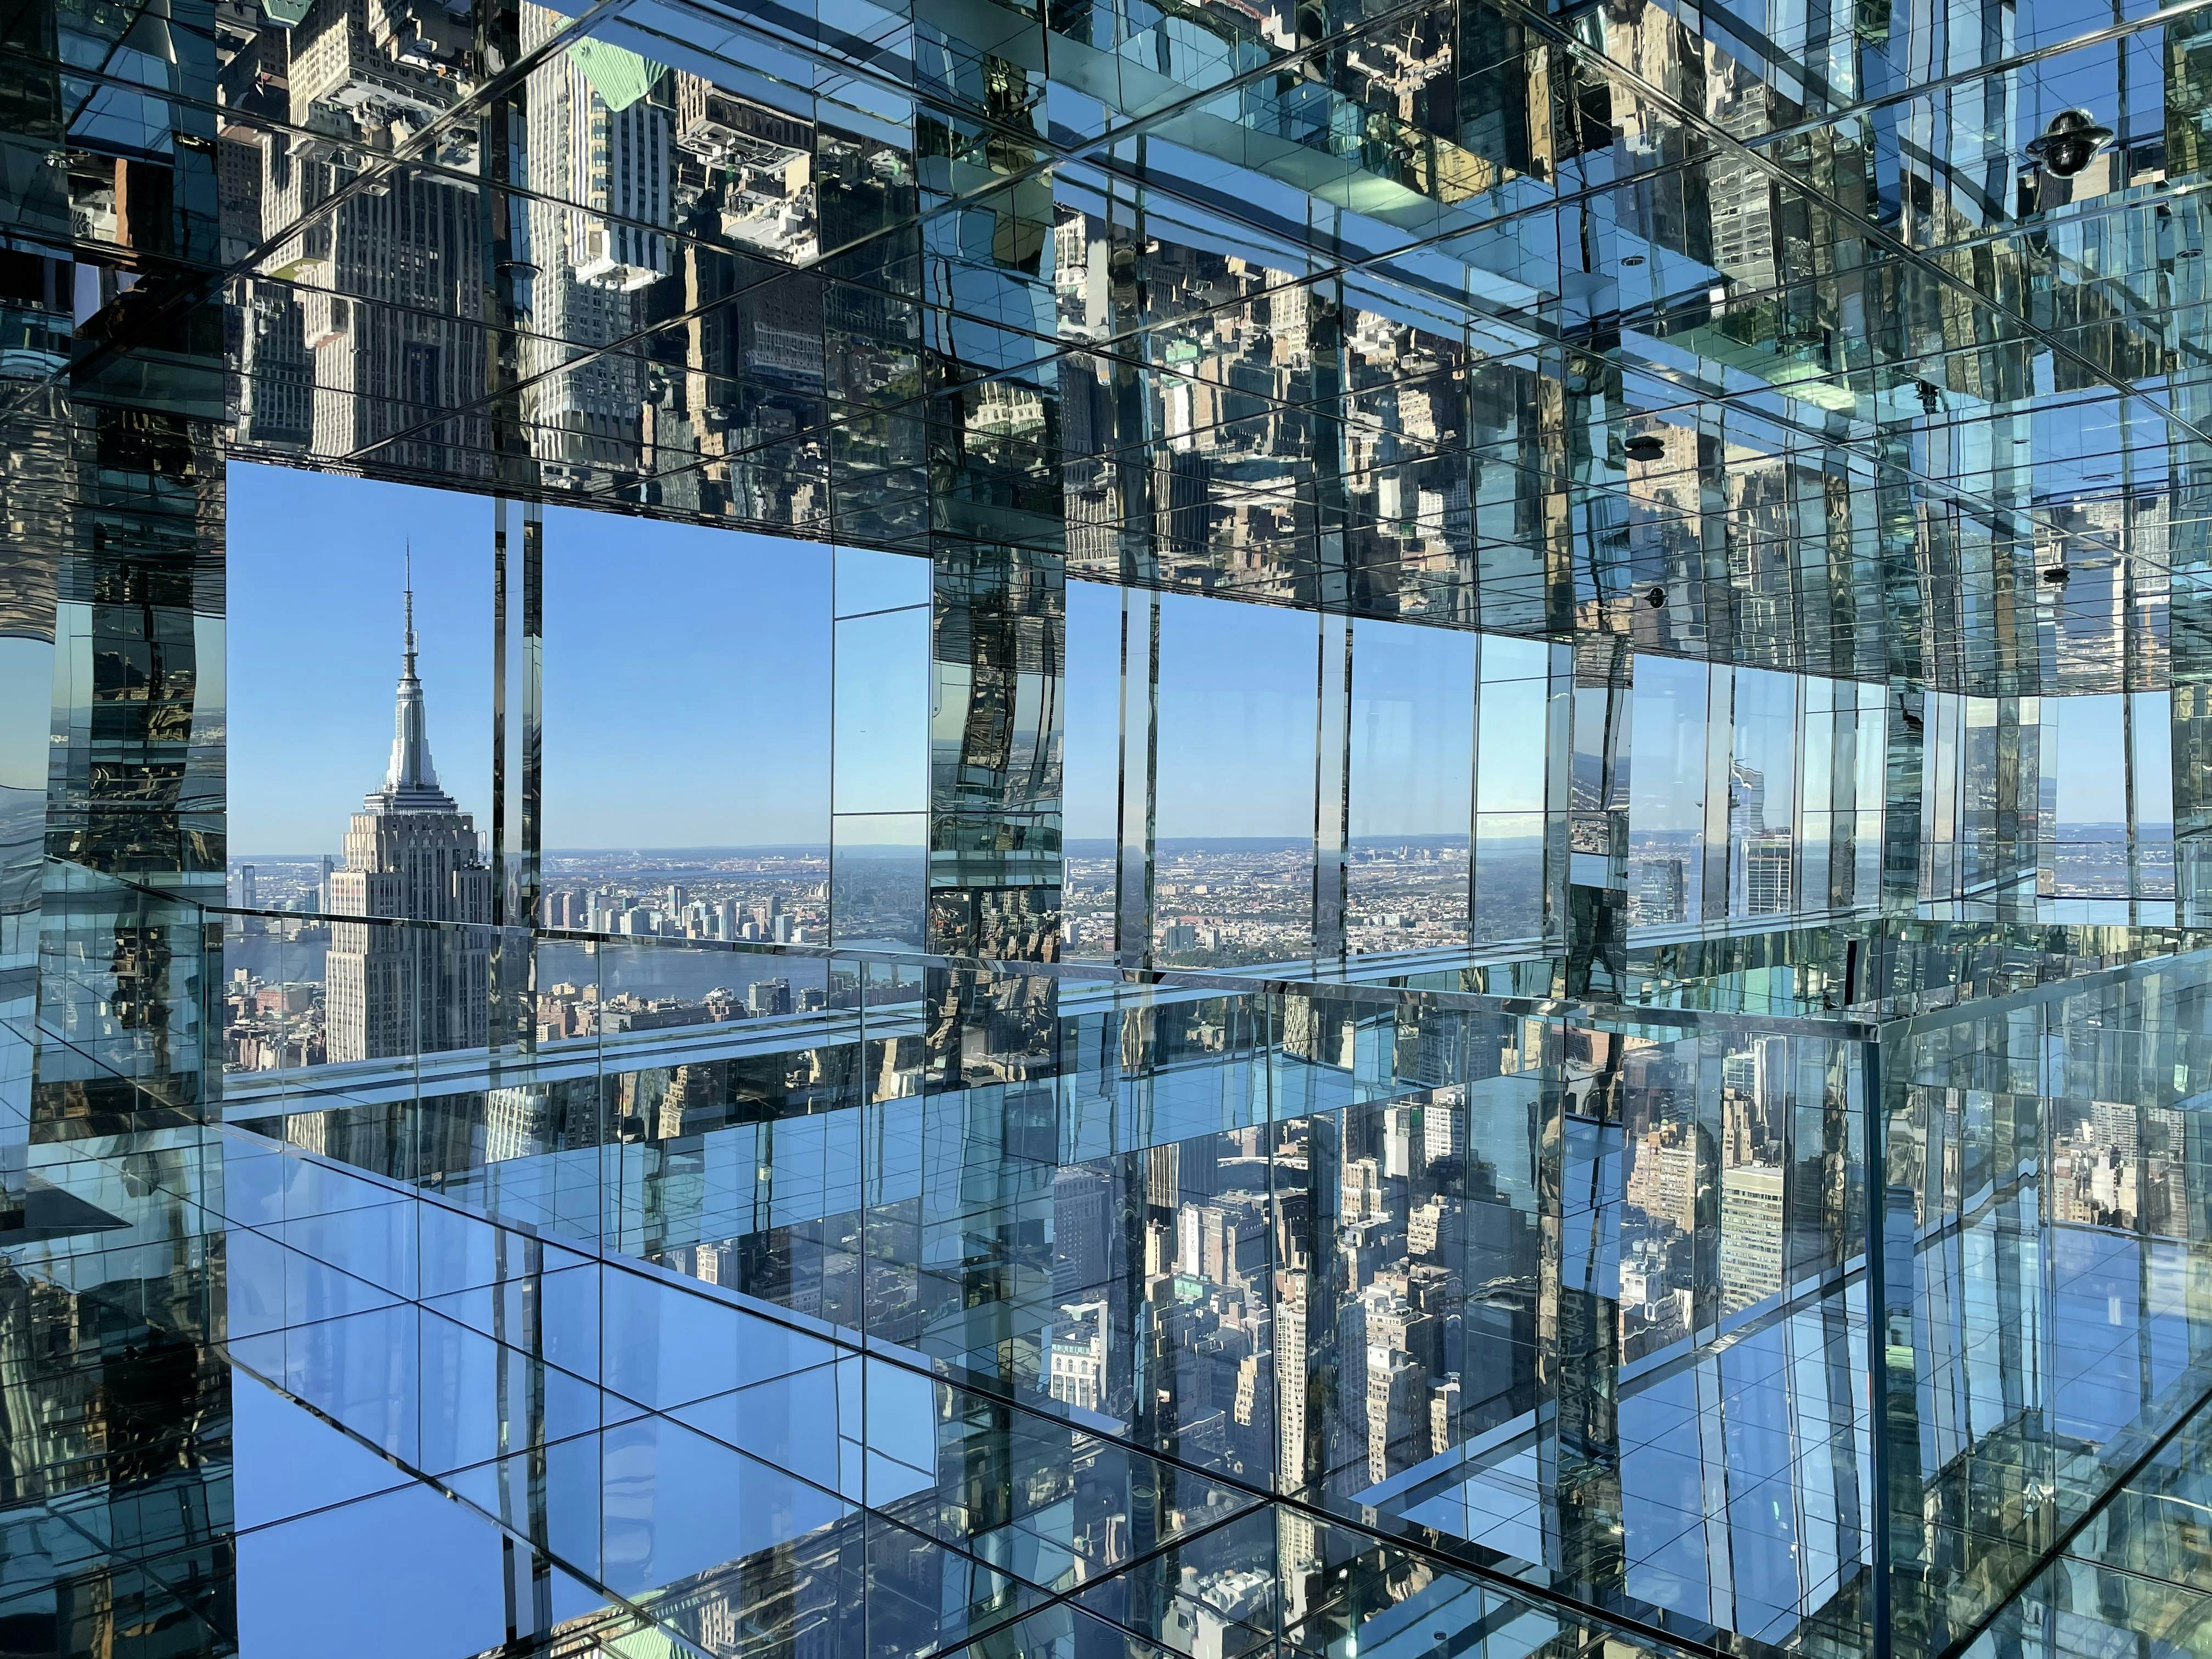 New York City's tallest observation deck is now open - Lonely Planet